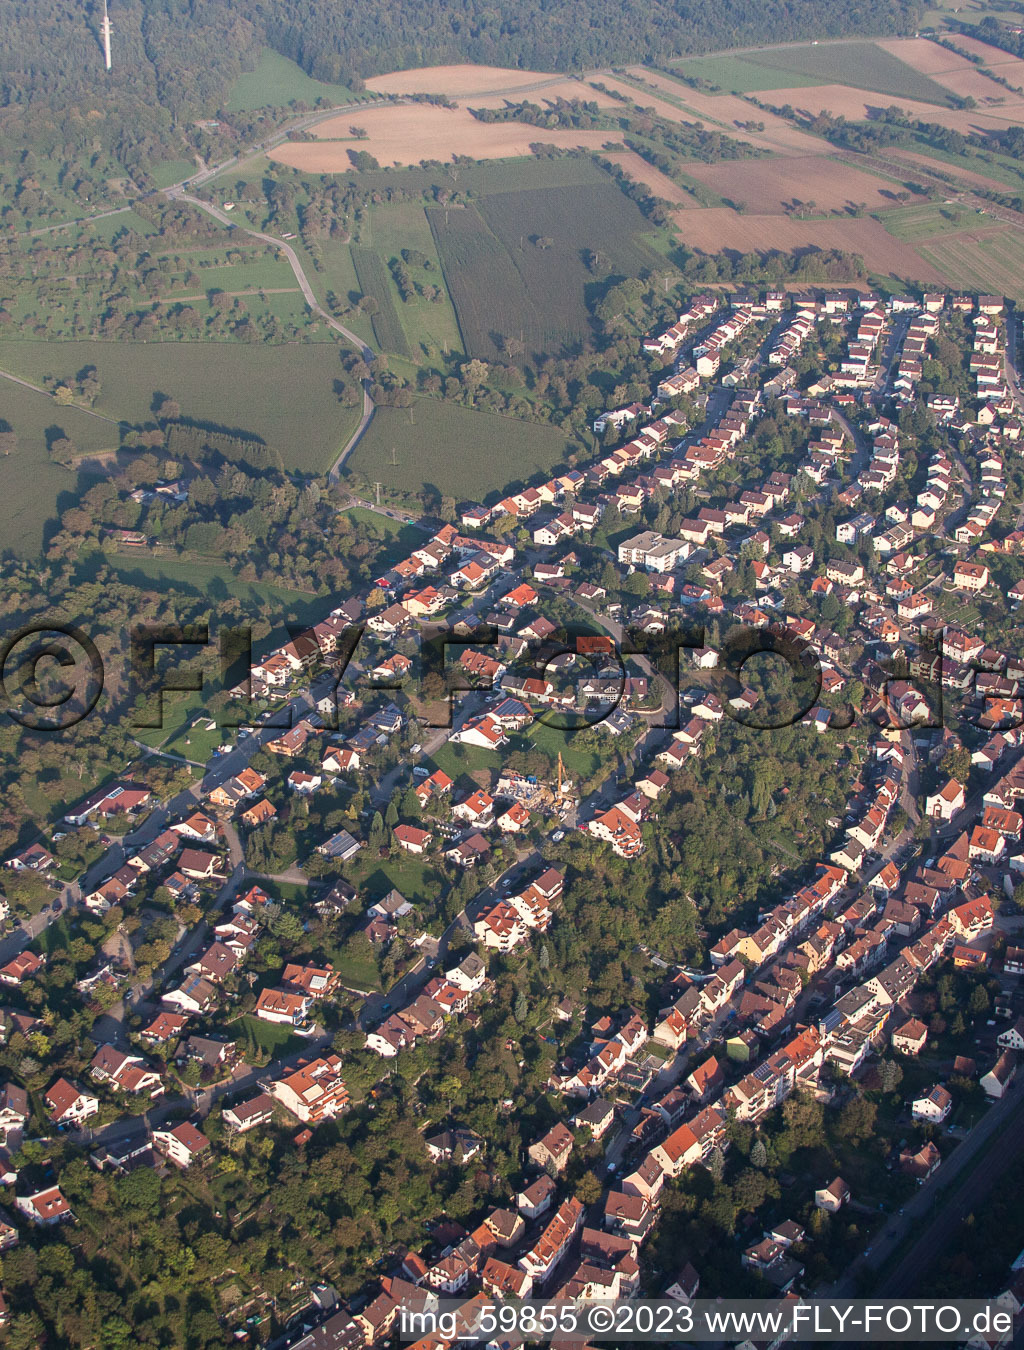 Drone image of Ispringen in the state Baden-Wuerttemberg, Germany